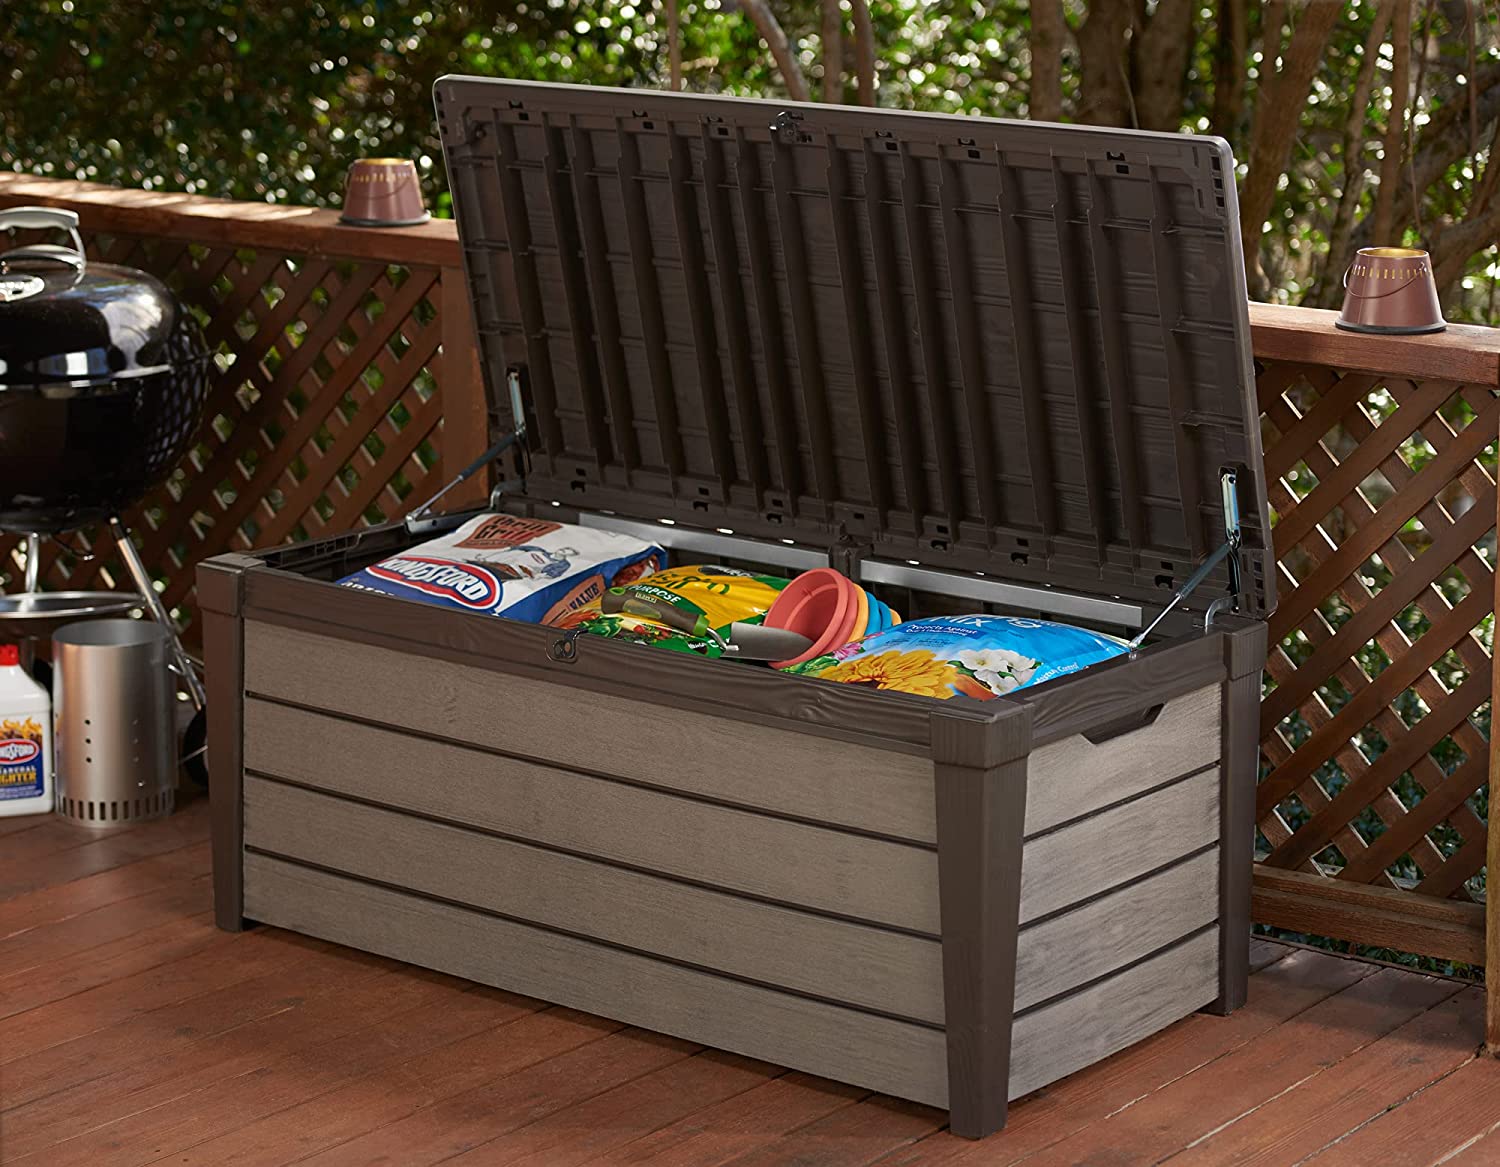 https://bigbigmart.com/wp-content/uploads/2023/05/Keter-Brushwood-120-Gallon-Resin-Large-Deck-Box-for-Patio-Garden-Furniture-Outdoor-Cushion-Storage-Pool-Accessories-and-Toys-Brown3.jpg